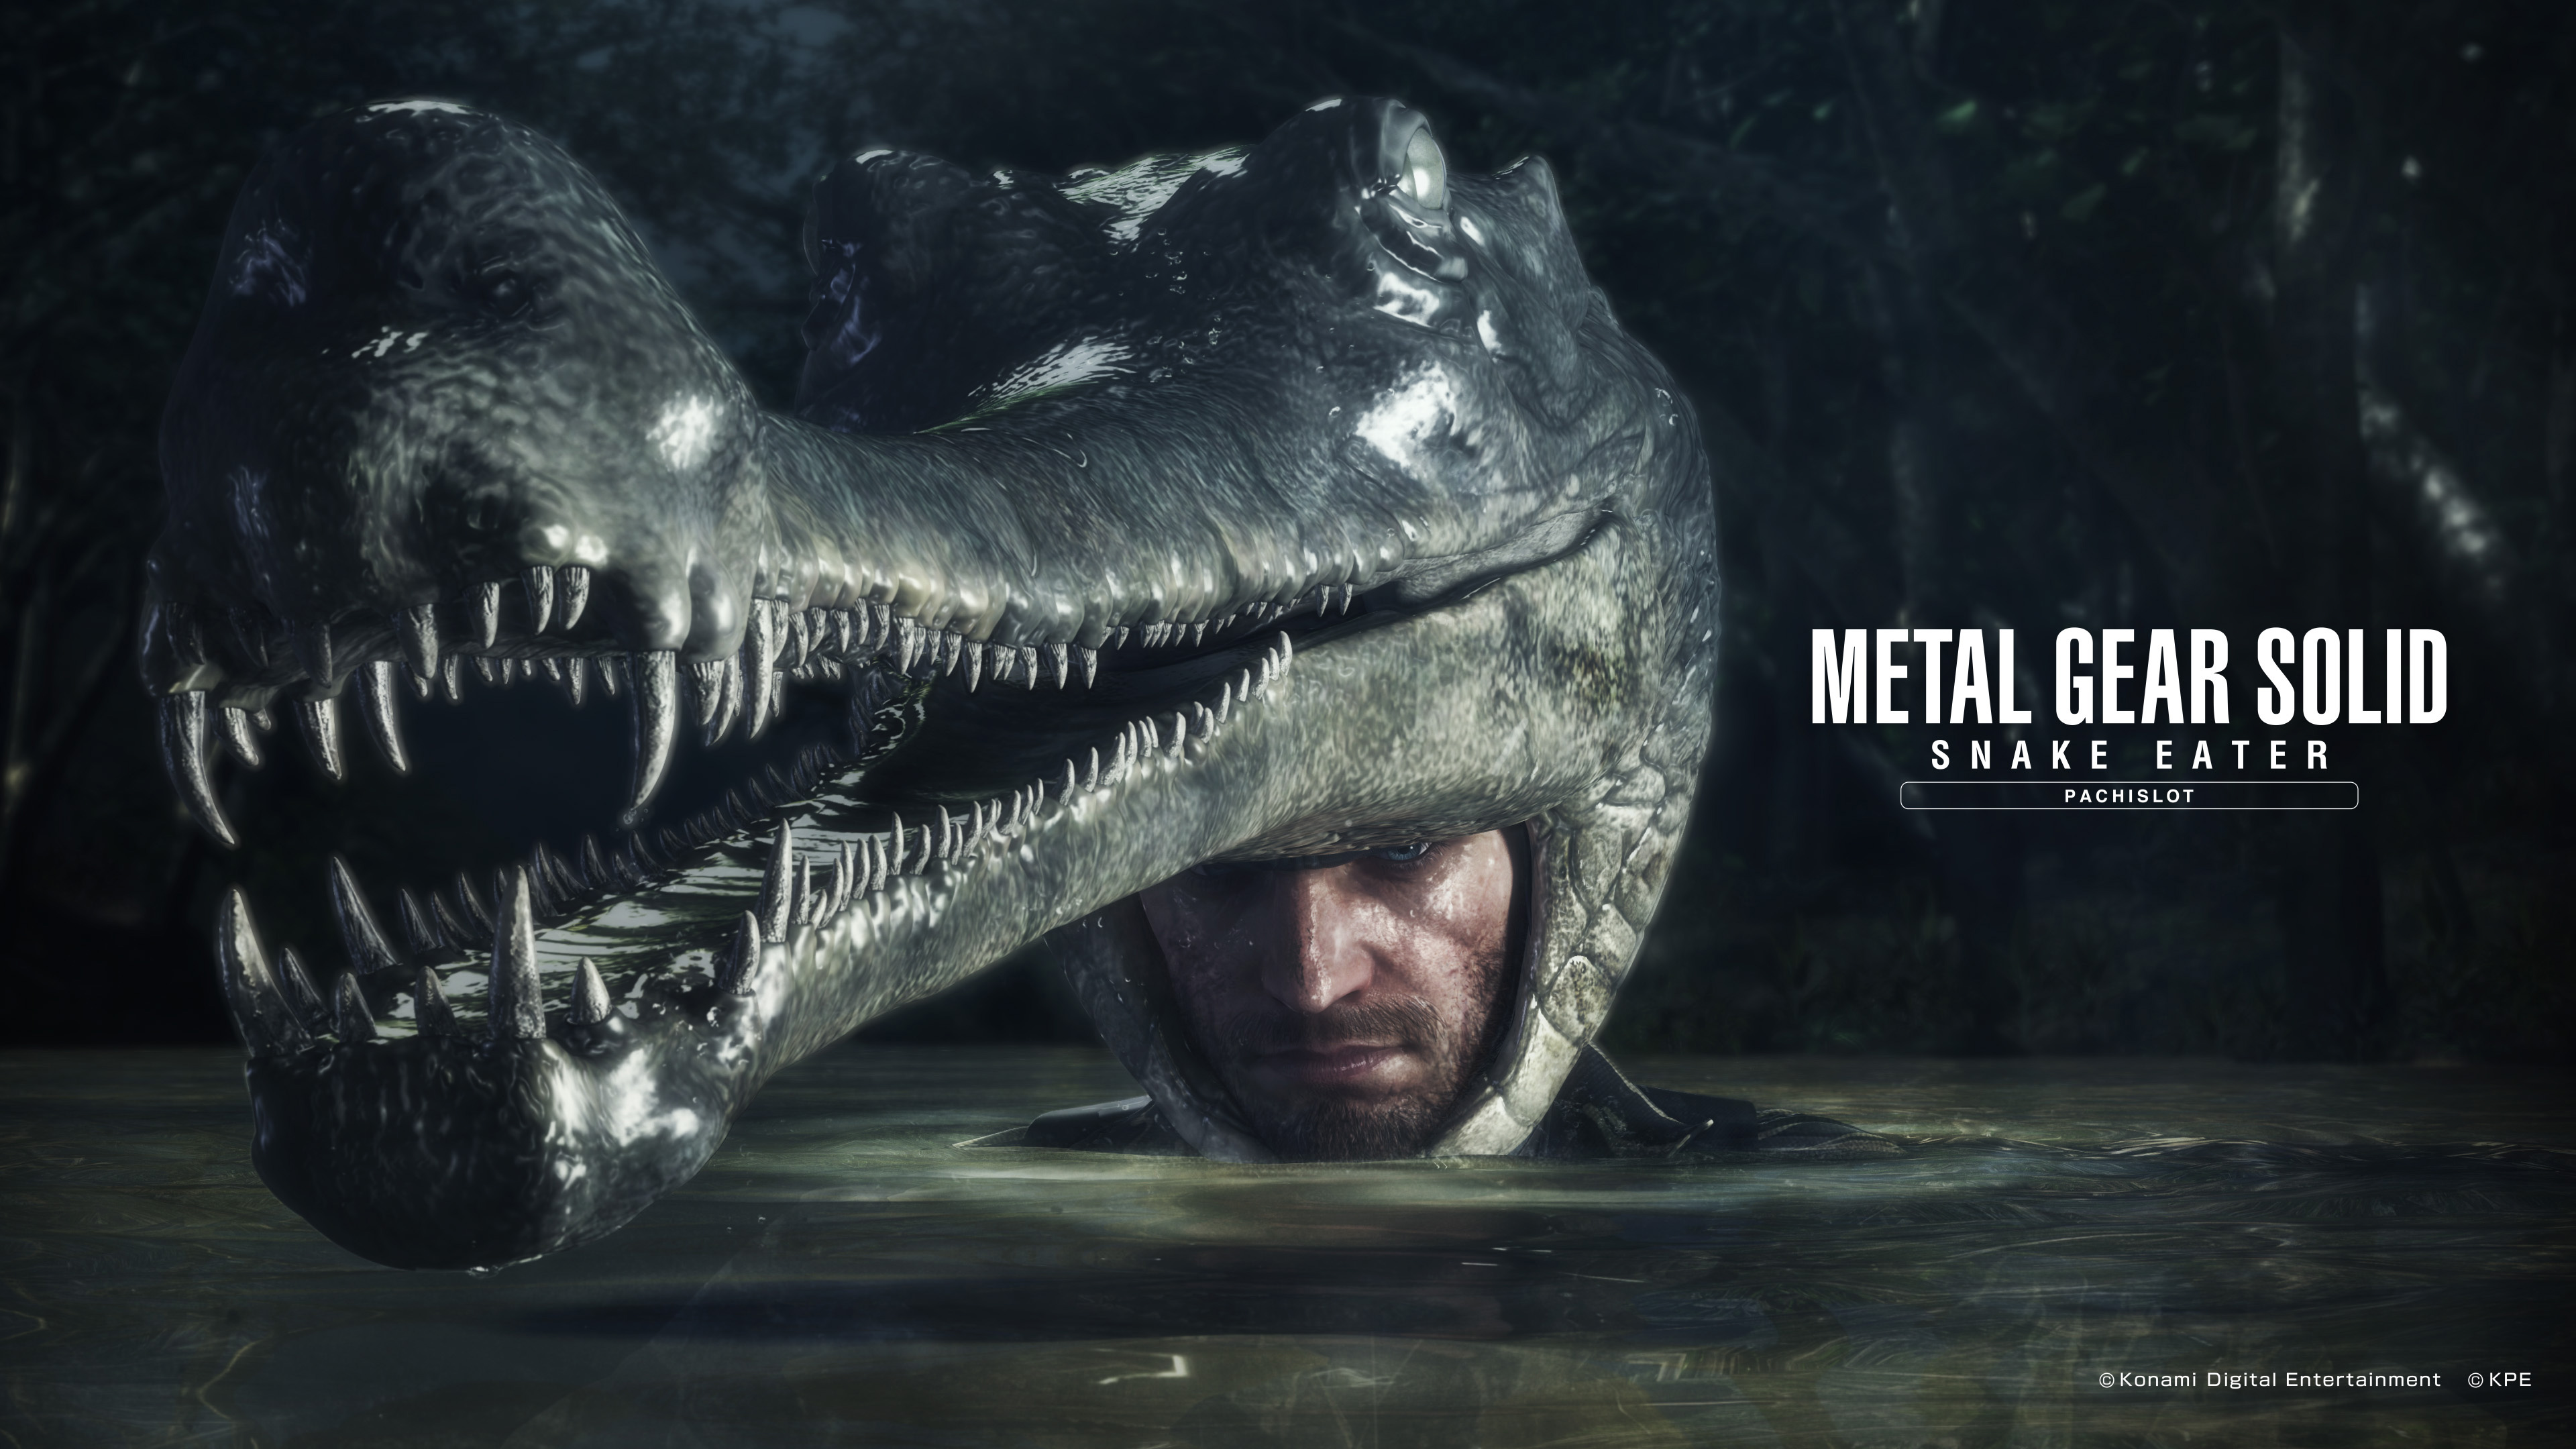 Official Metal Gear Solid Snake Eater Pachislot wallpapers